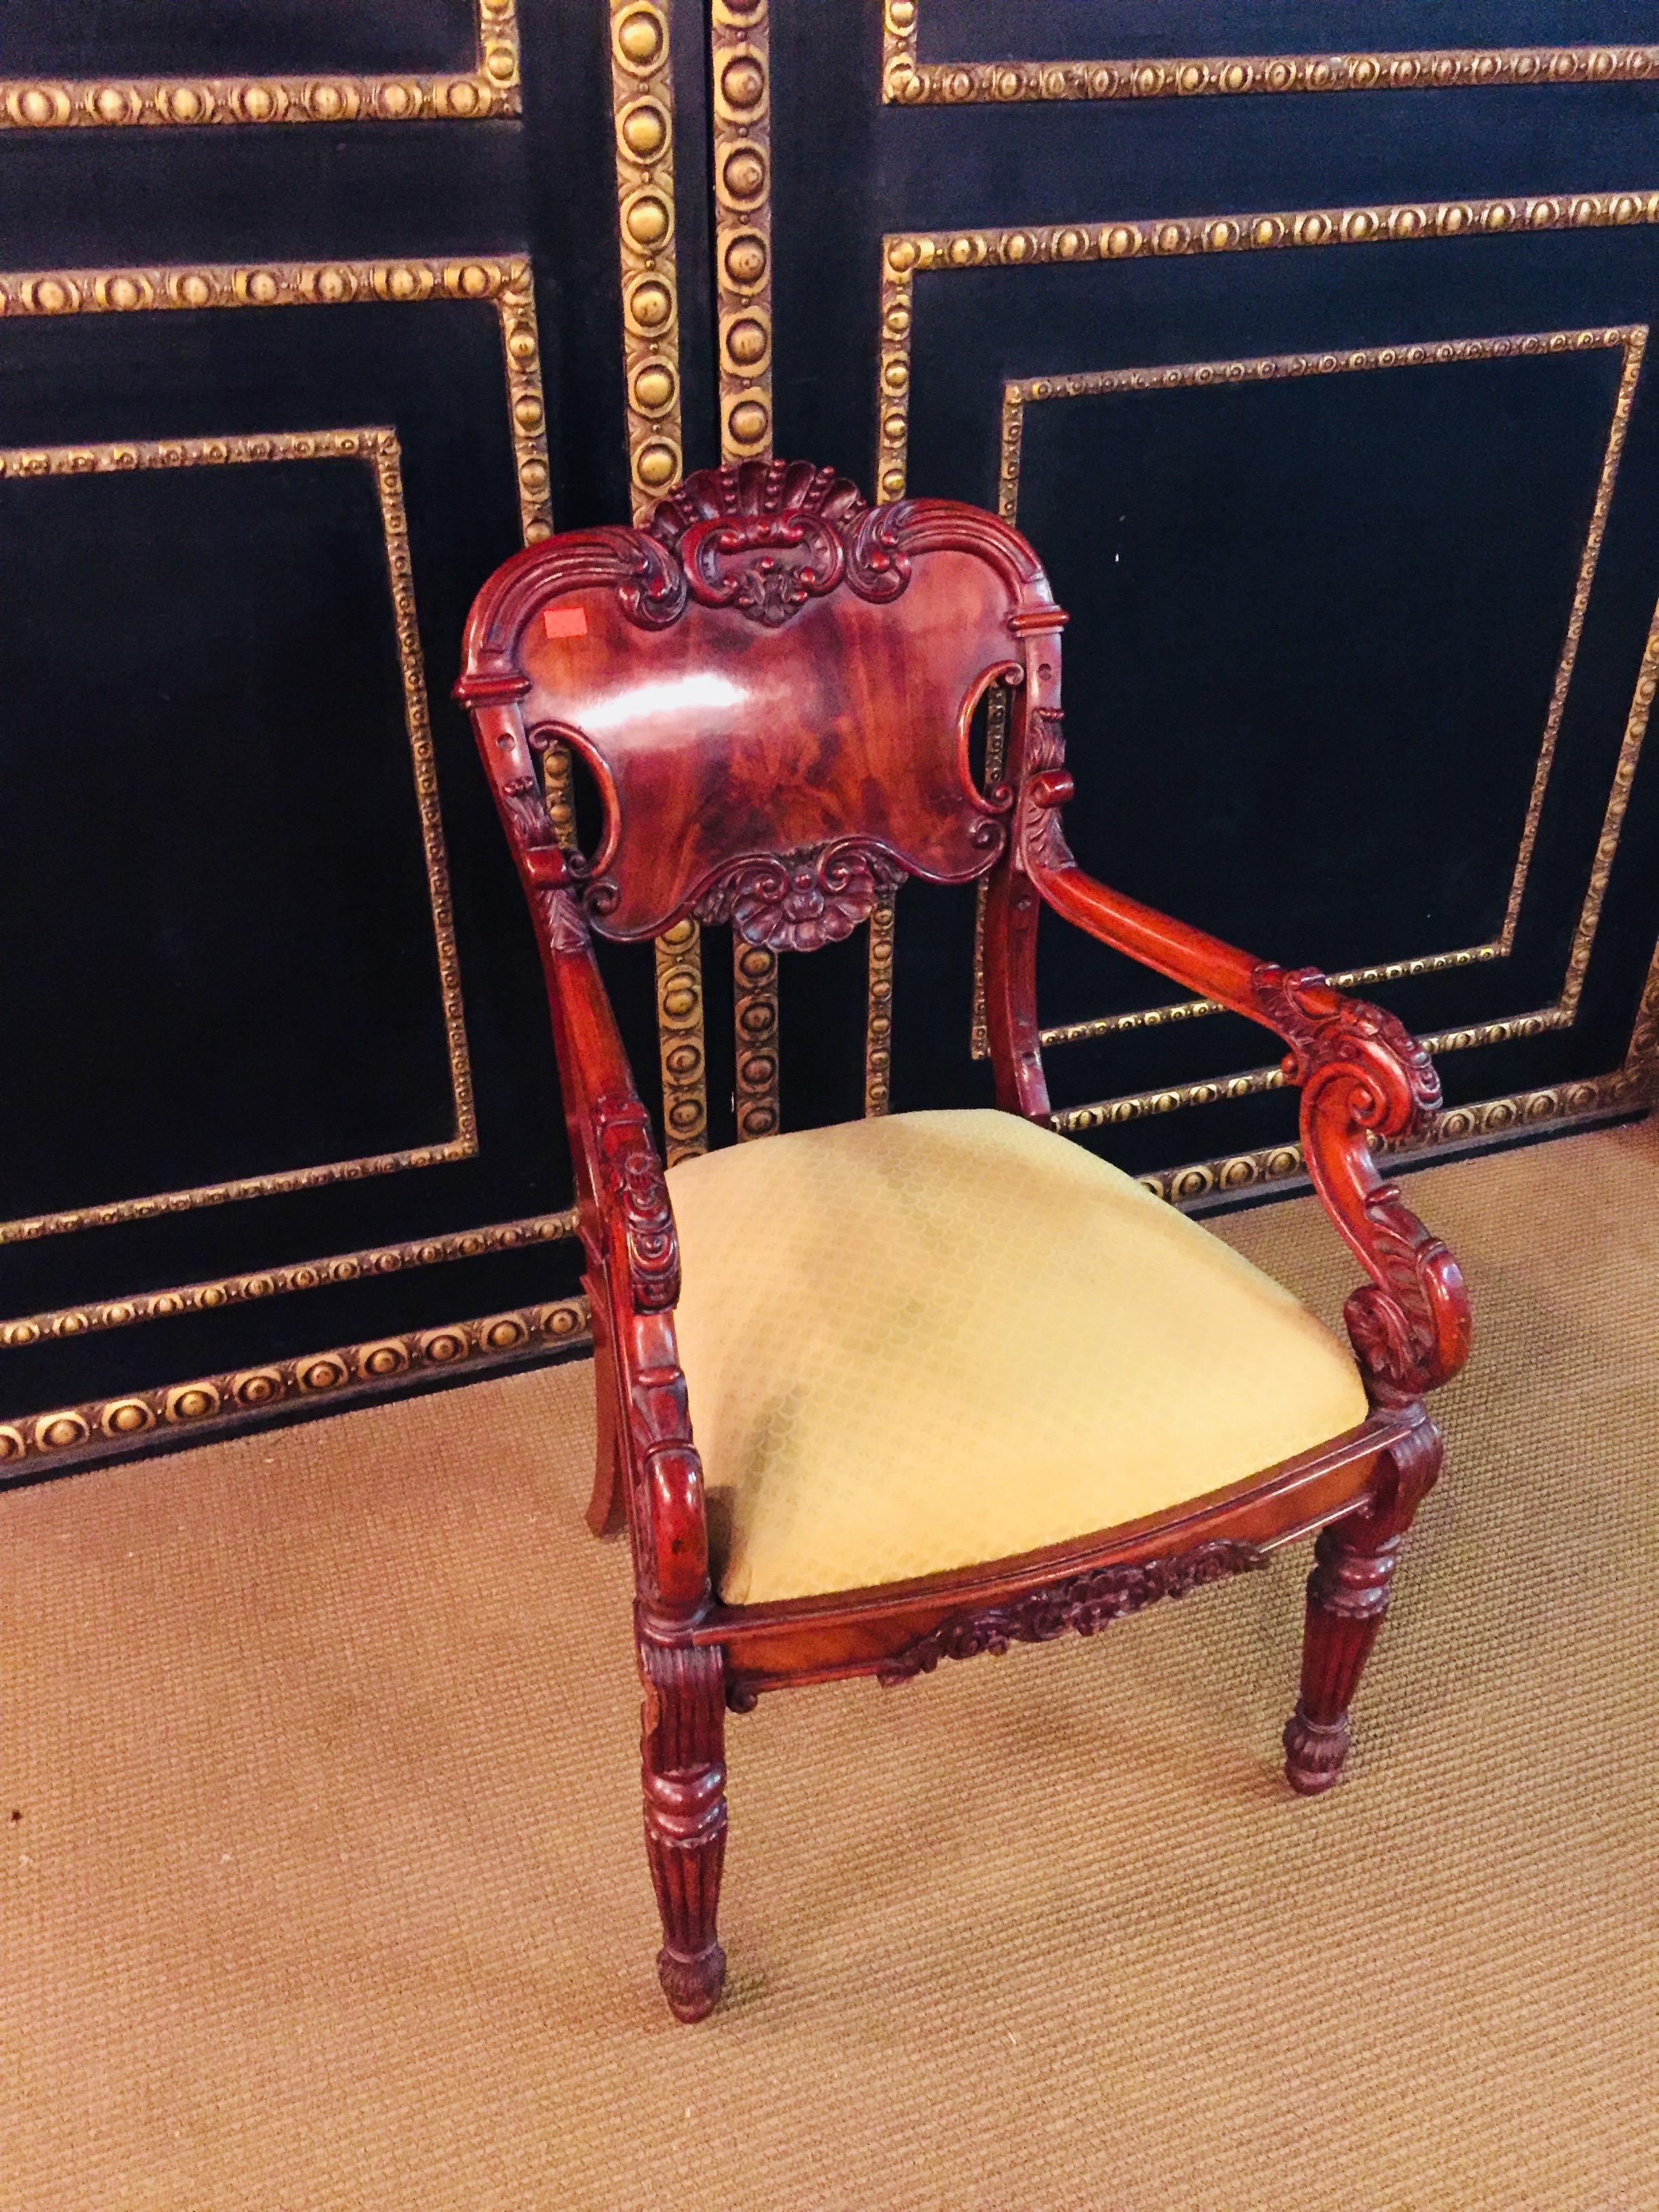 Solid mahogany. Curved frame on ballustrade legs with attached foliage. Strongly curved supports for slightly rising armrests. Rectangular, profiled, richly carved backrest frame with broad end crowned with sculpted Rocaillenbekrönung. Seat newly